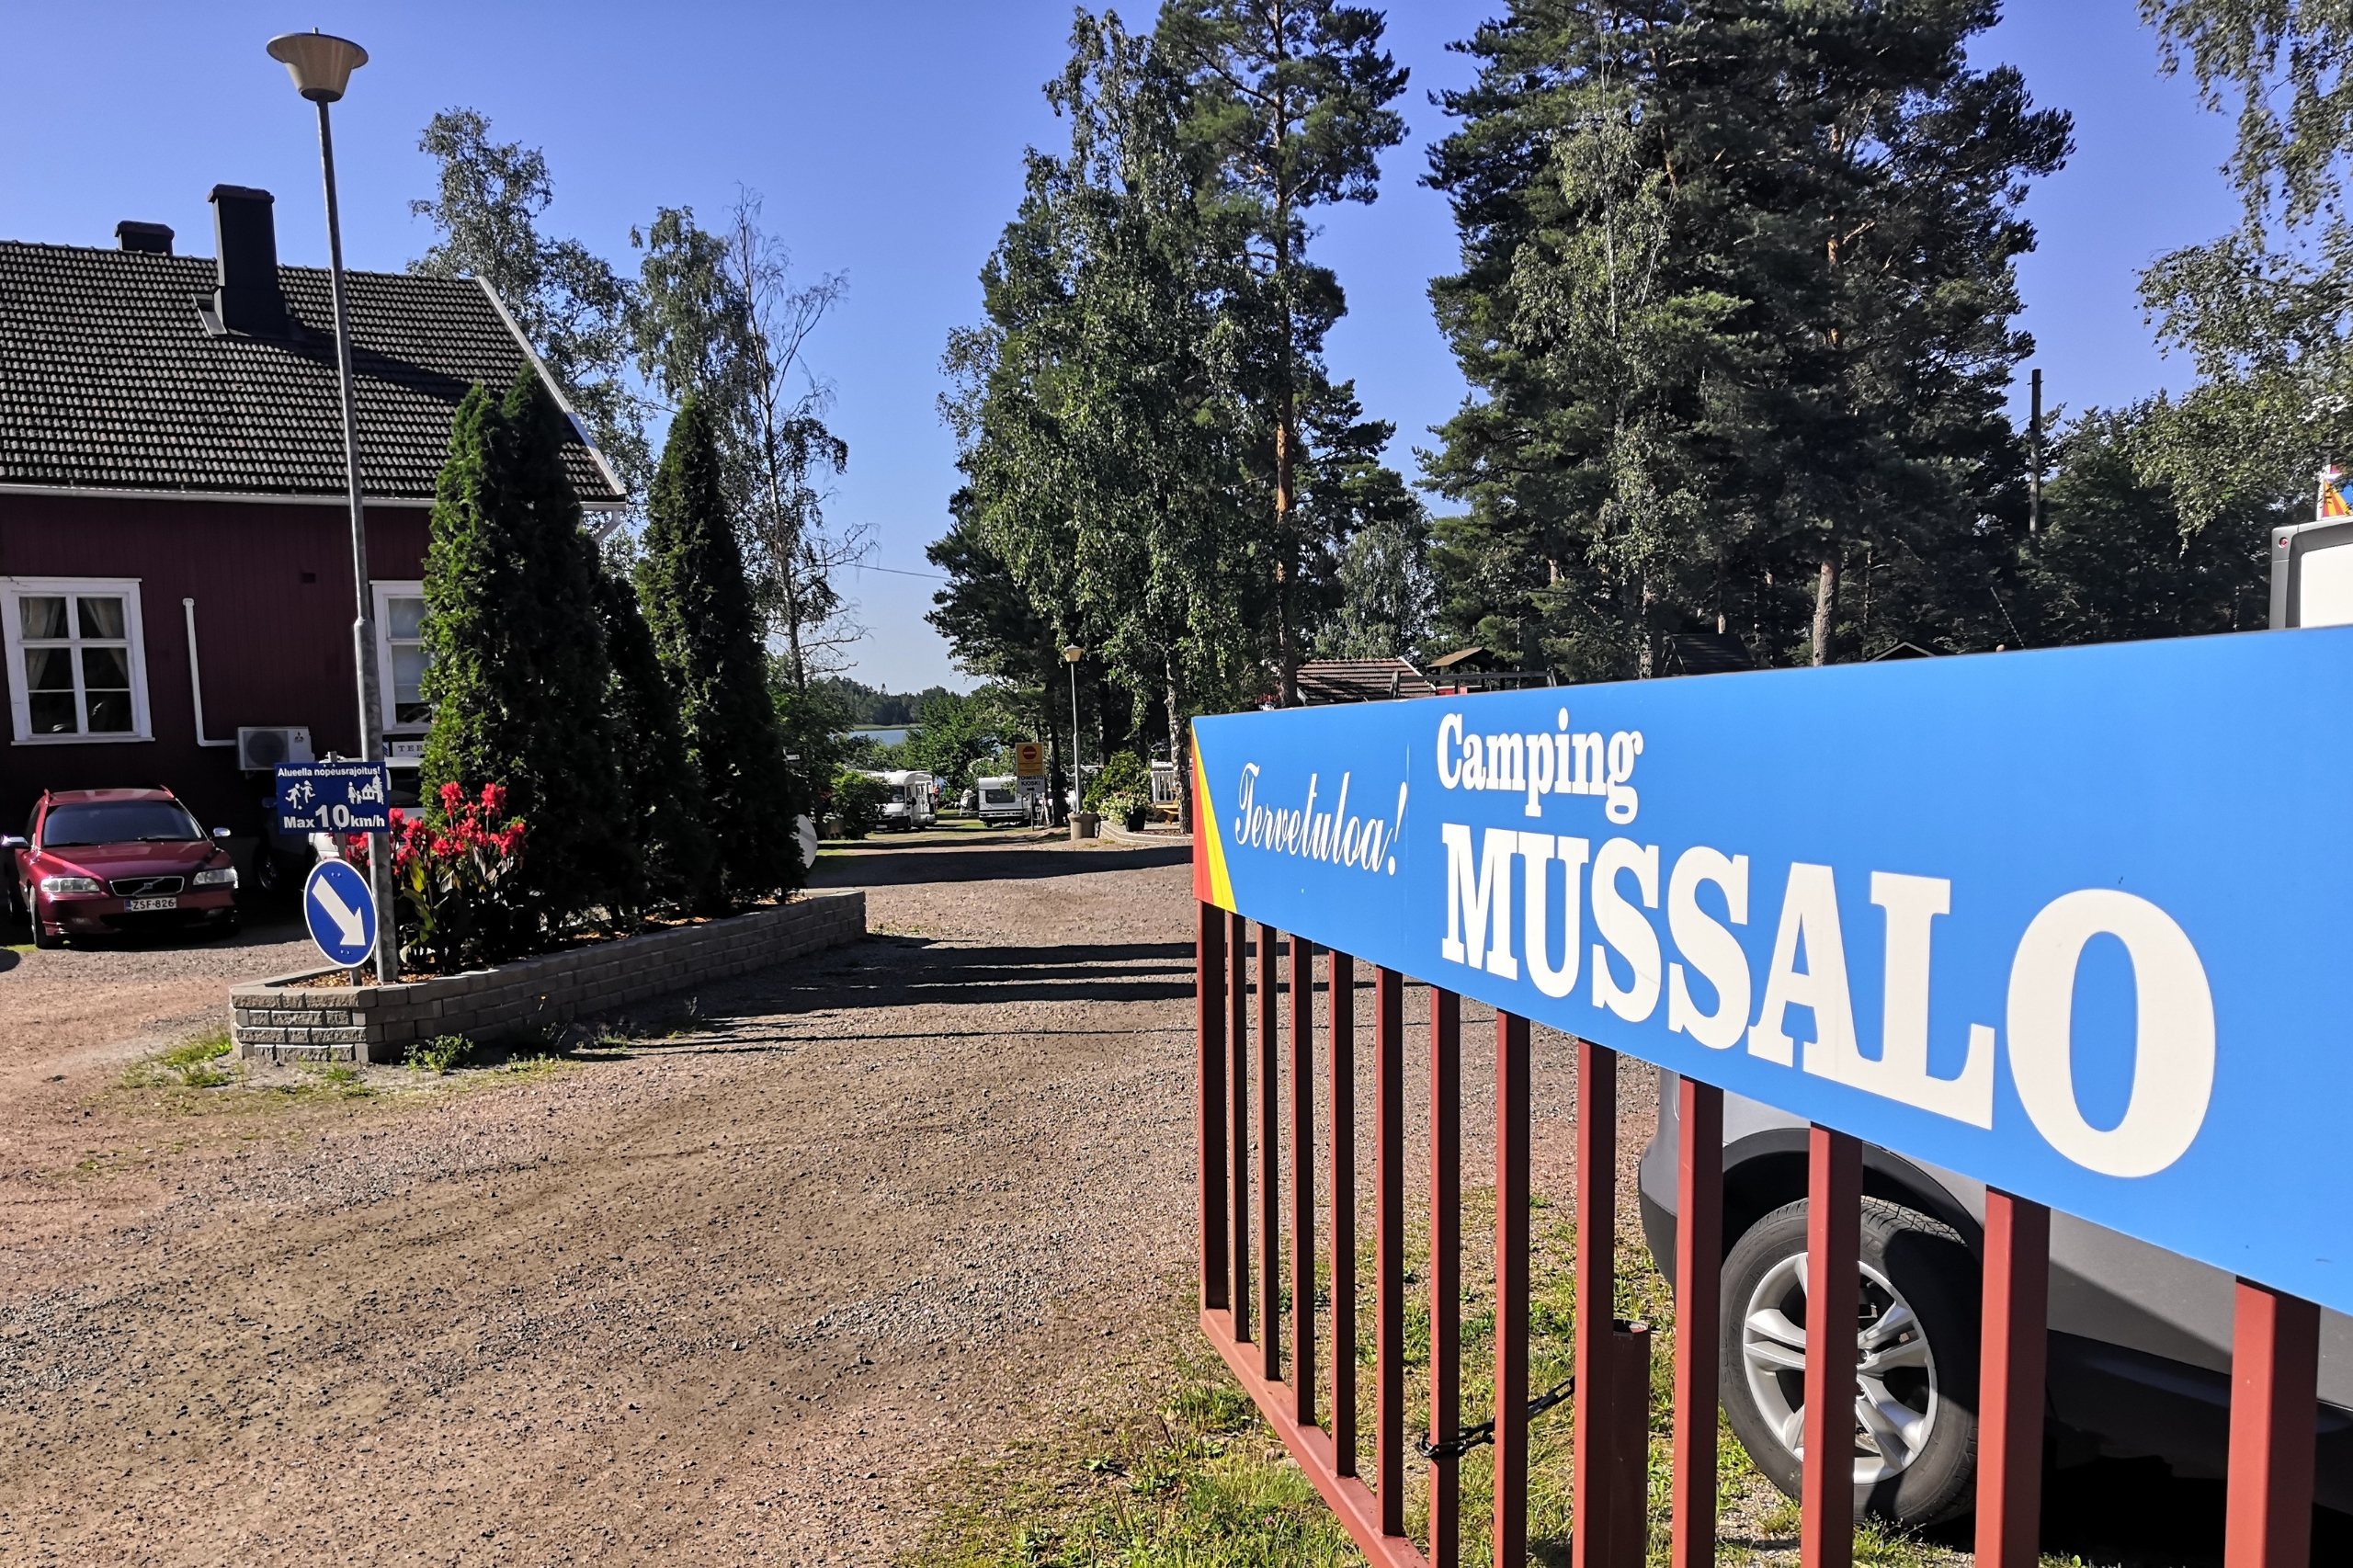 A warm welcome is guaranteed at Camping Mussalo.